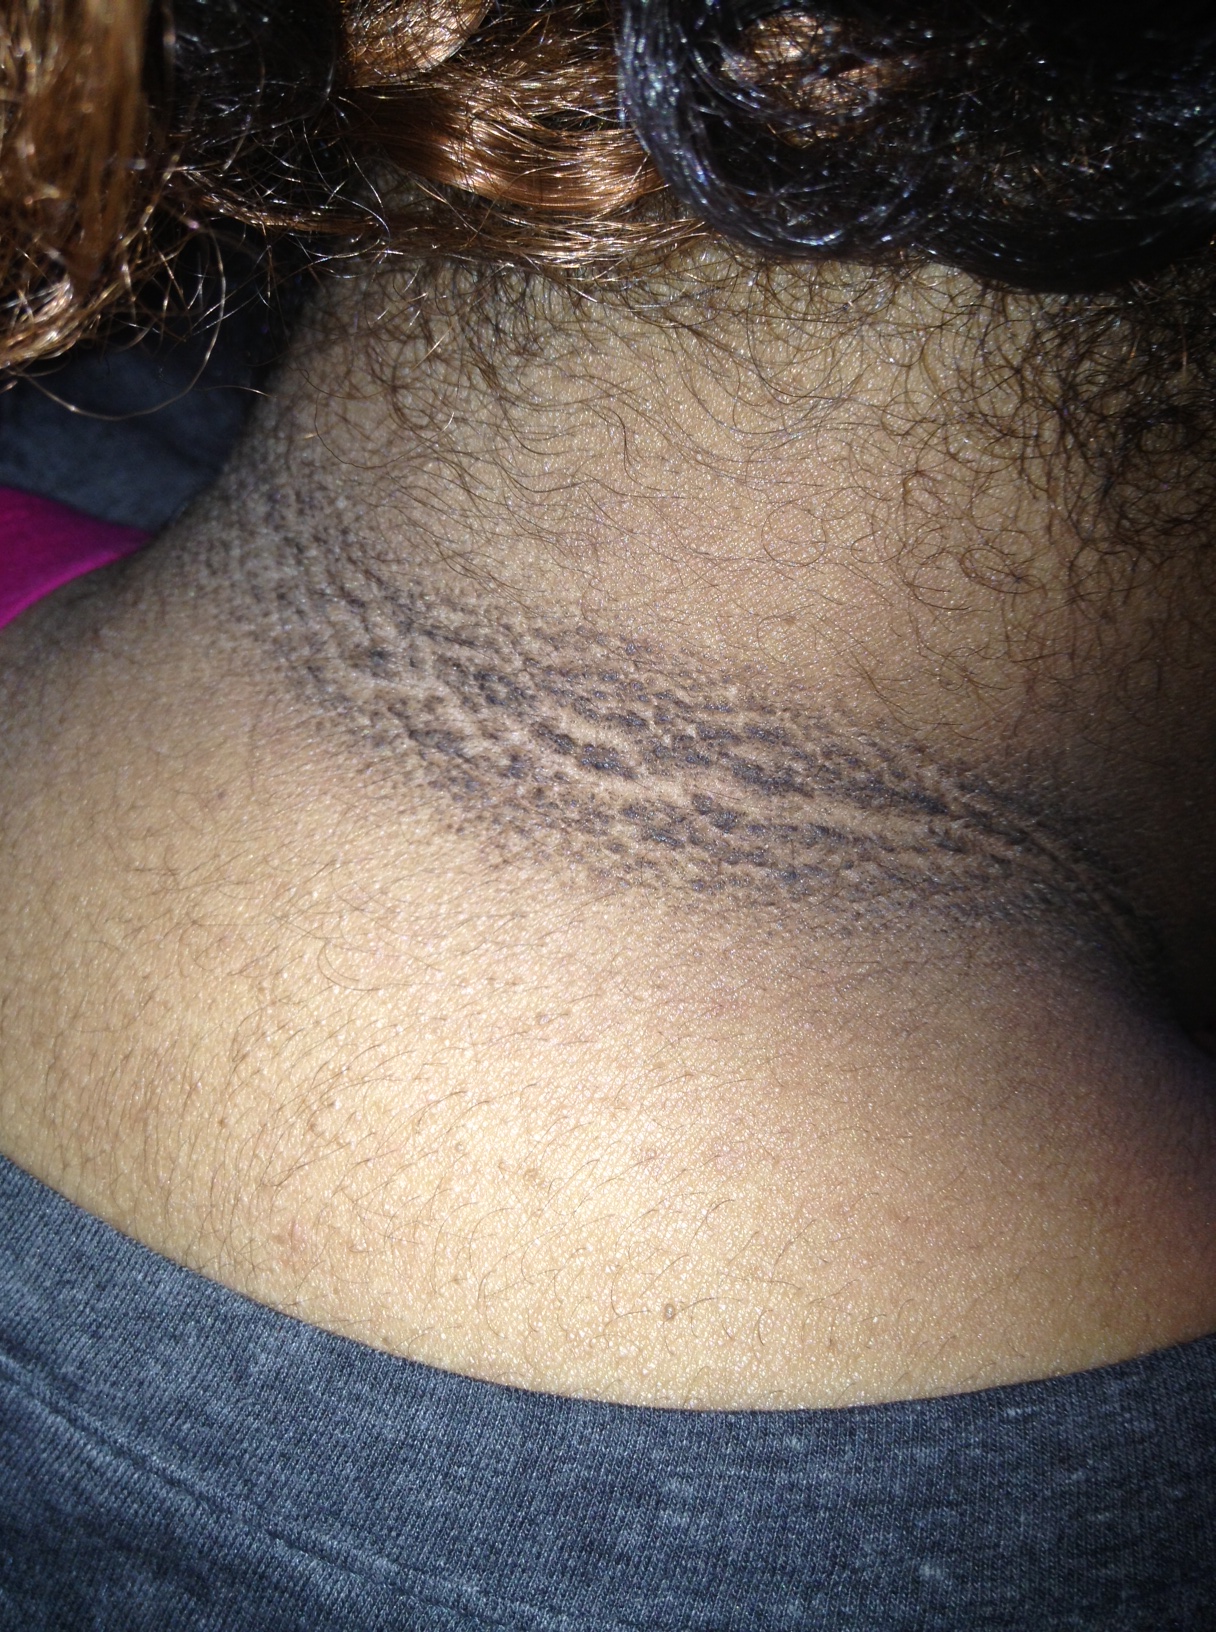 Acanthosis nigricans of the neck